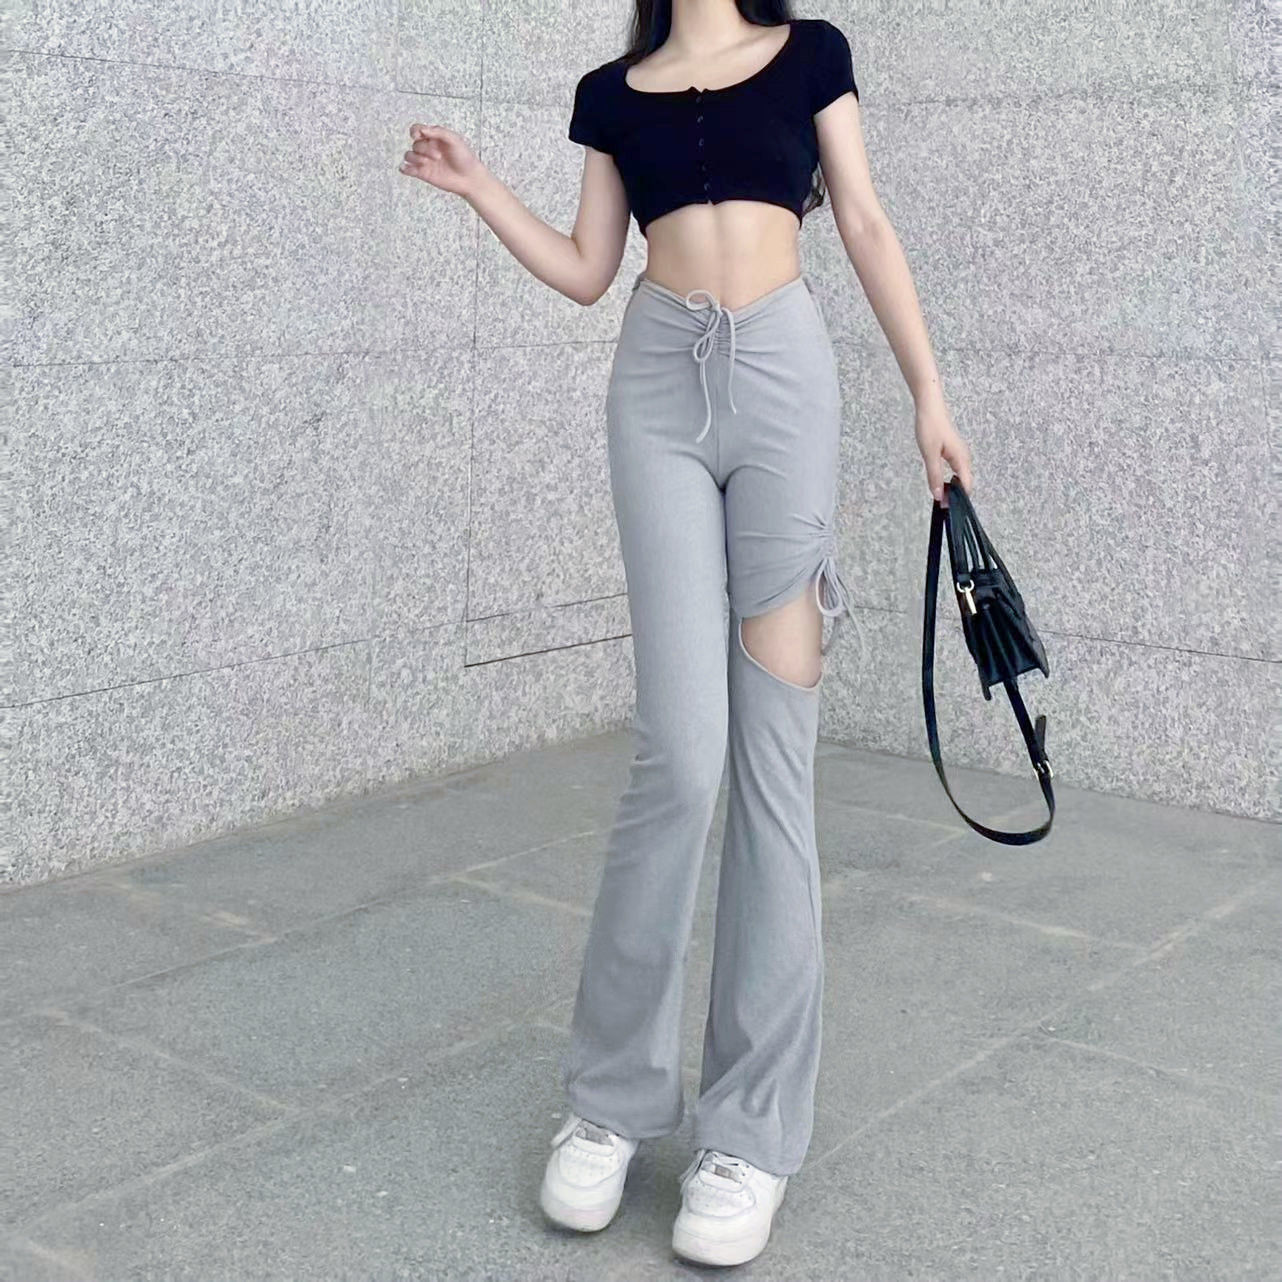 Design sense micro flared tie hollow casual pants women's summer  new trousers high waist slim flared pants